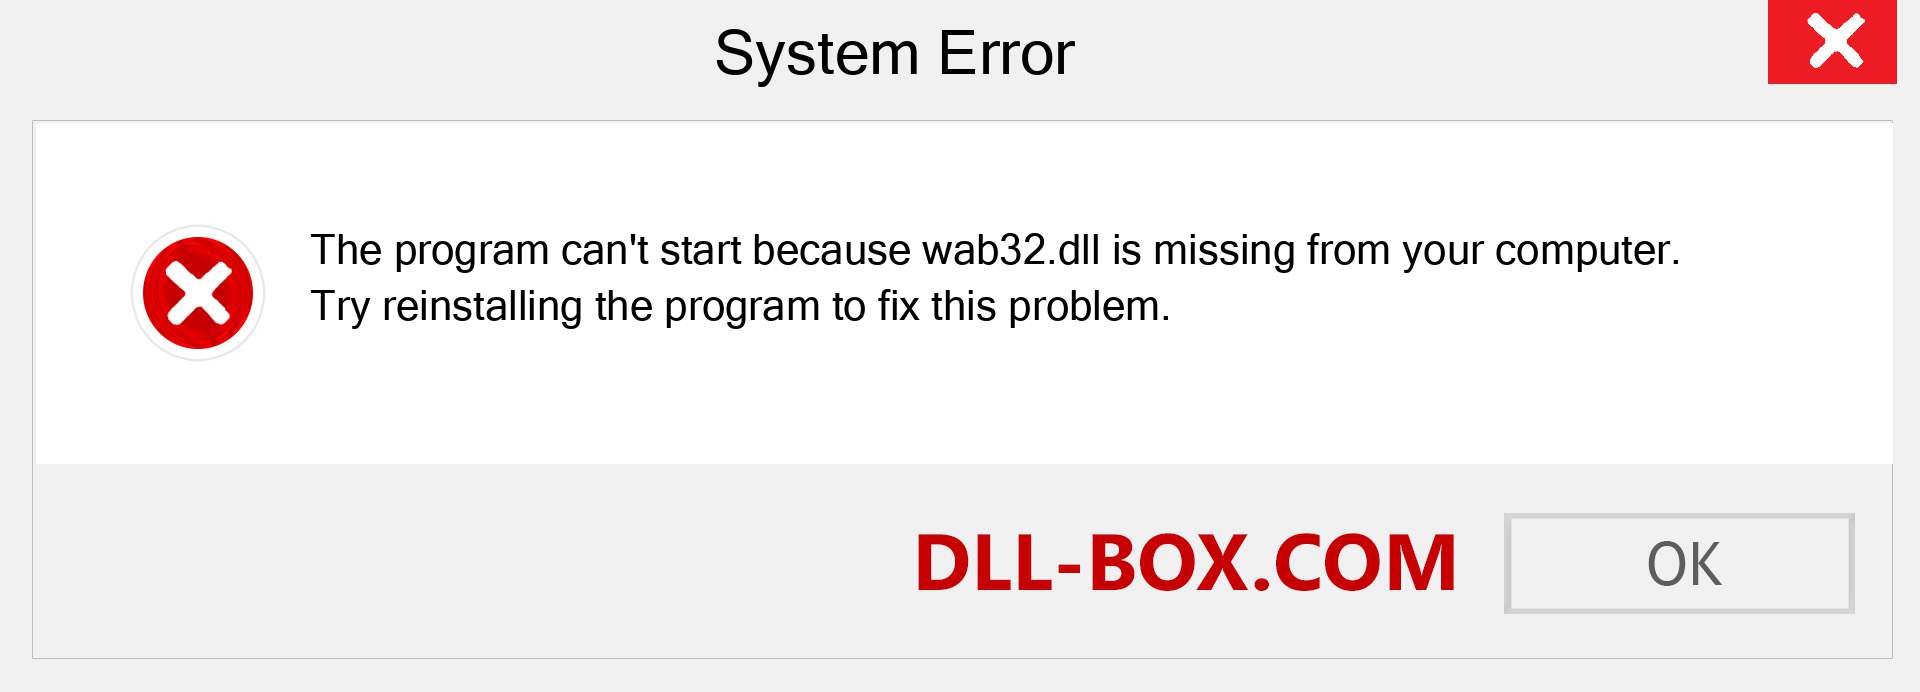  wab32.dll file is missing?. Download for Windows 7, 8, 10 - Fix  wab32 dll Missing Error on Windows, photos, images